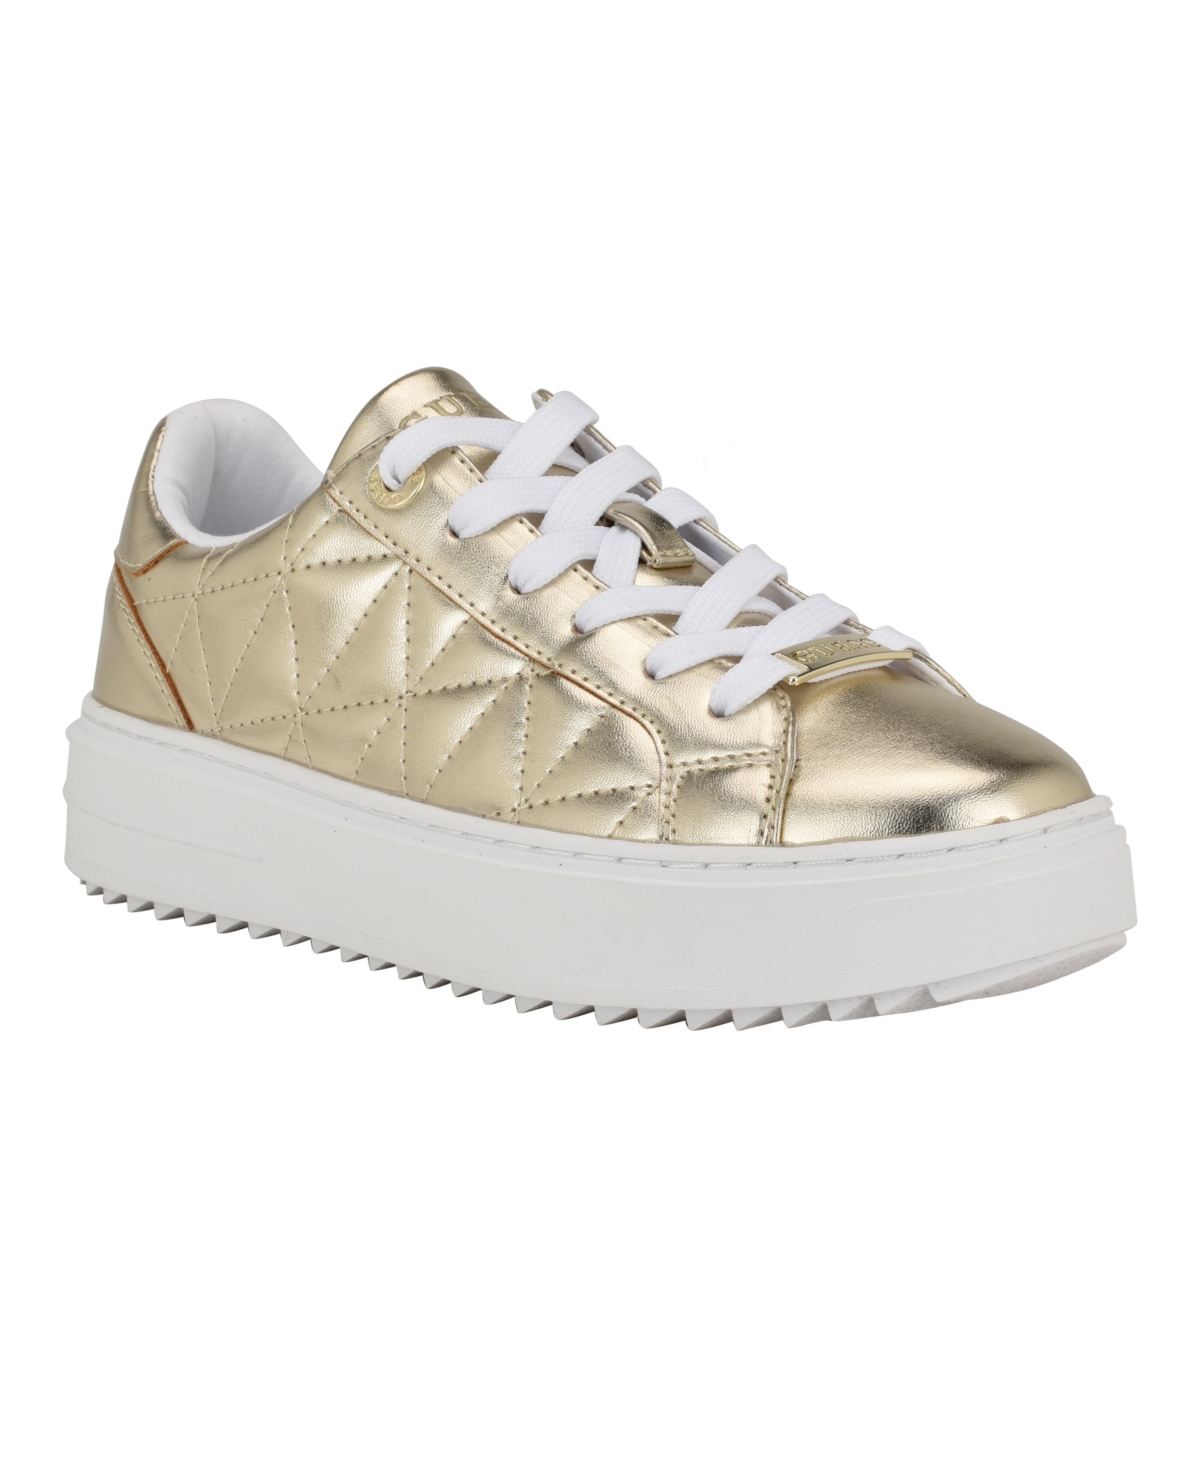 Women's Desena Quilted Platform Lace Up Sneakers - Gold